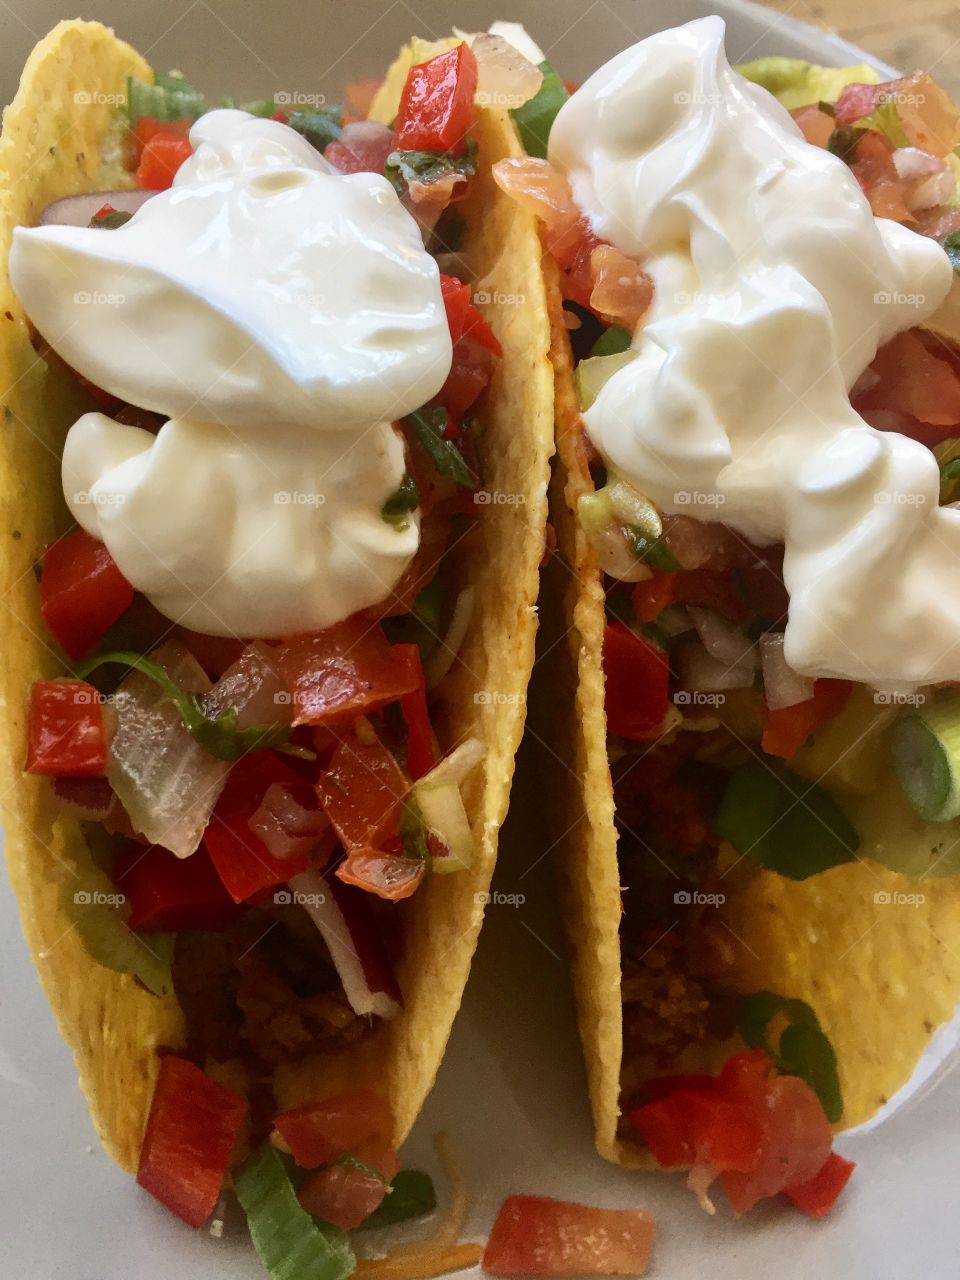 Taco lunch or dinner plate with tomatoes onions guacamole and sour cream on a crispy cornflour shell yum!